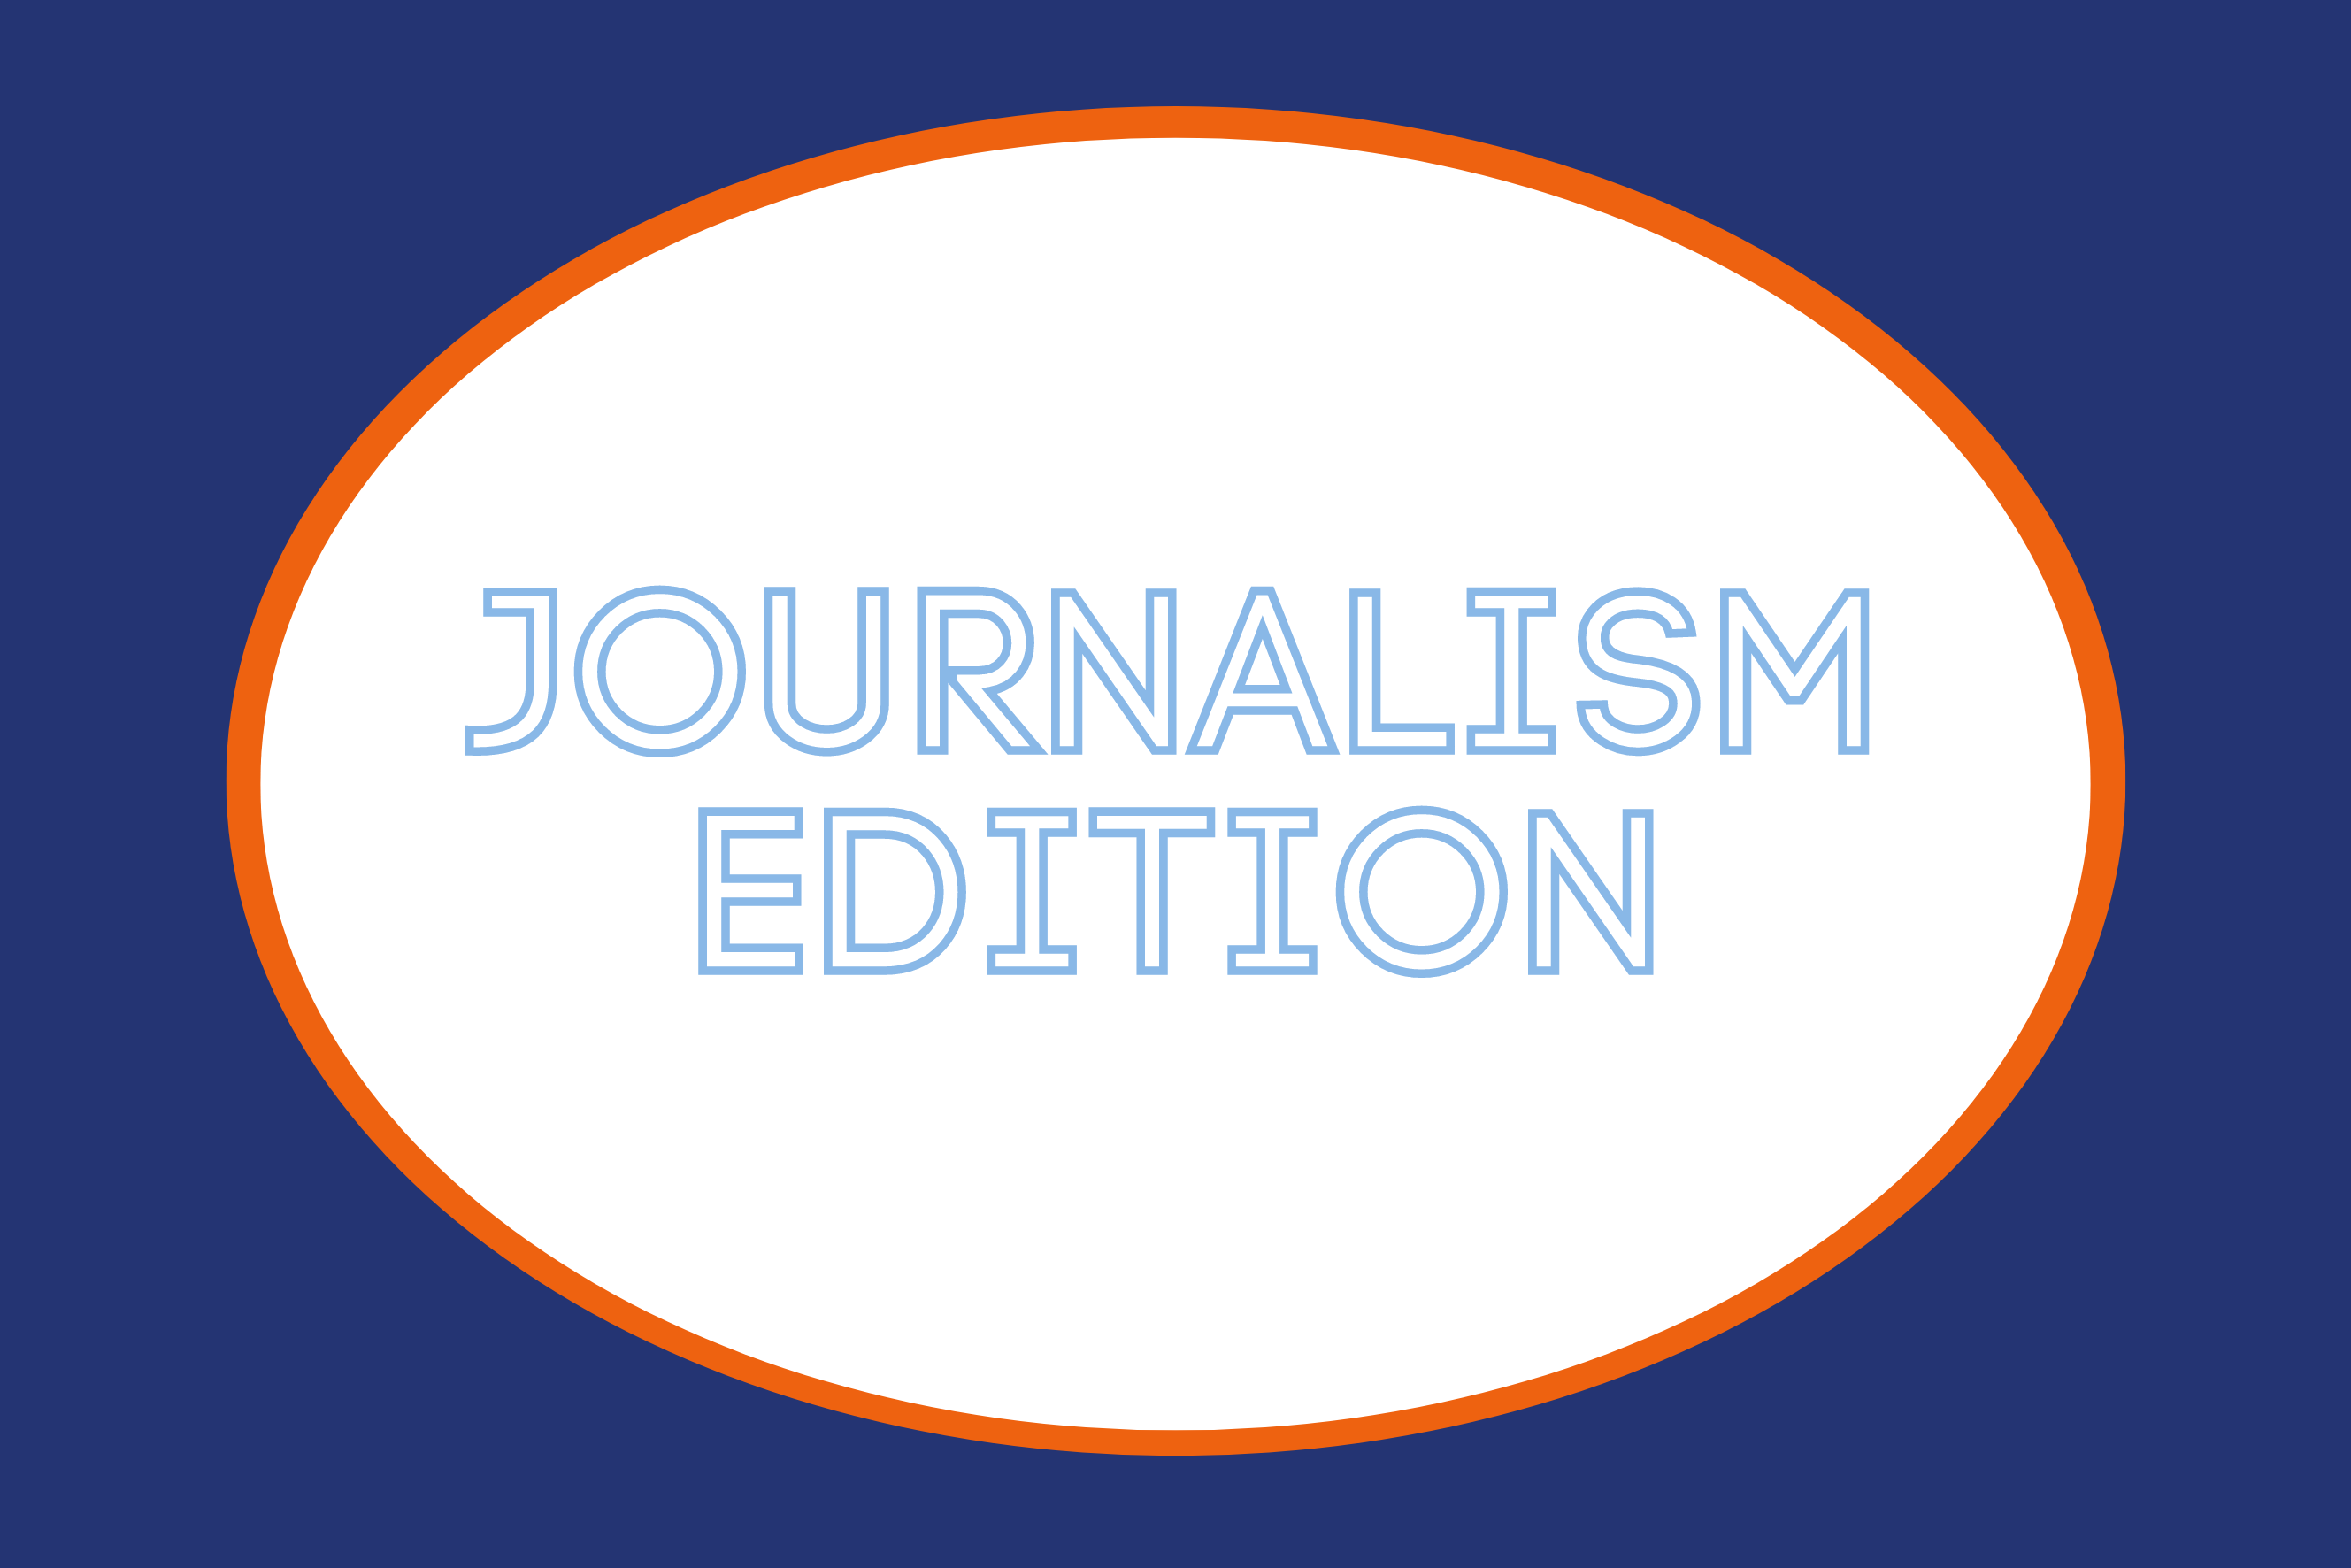 Journalism editions